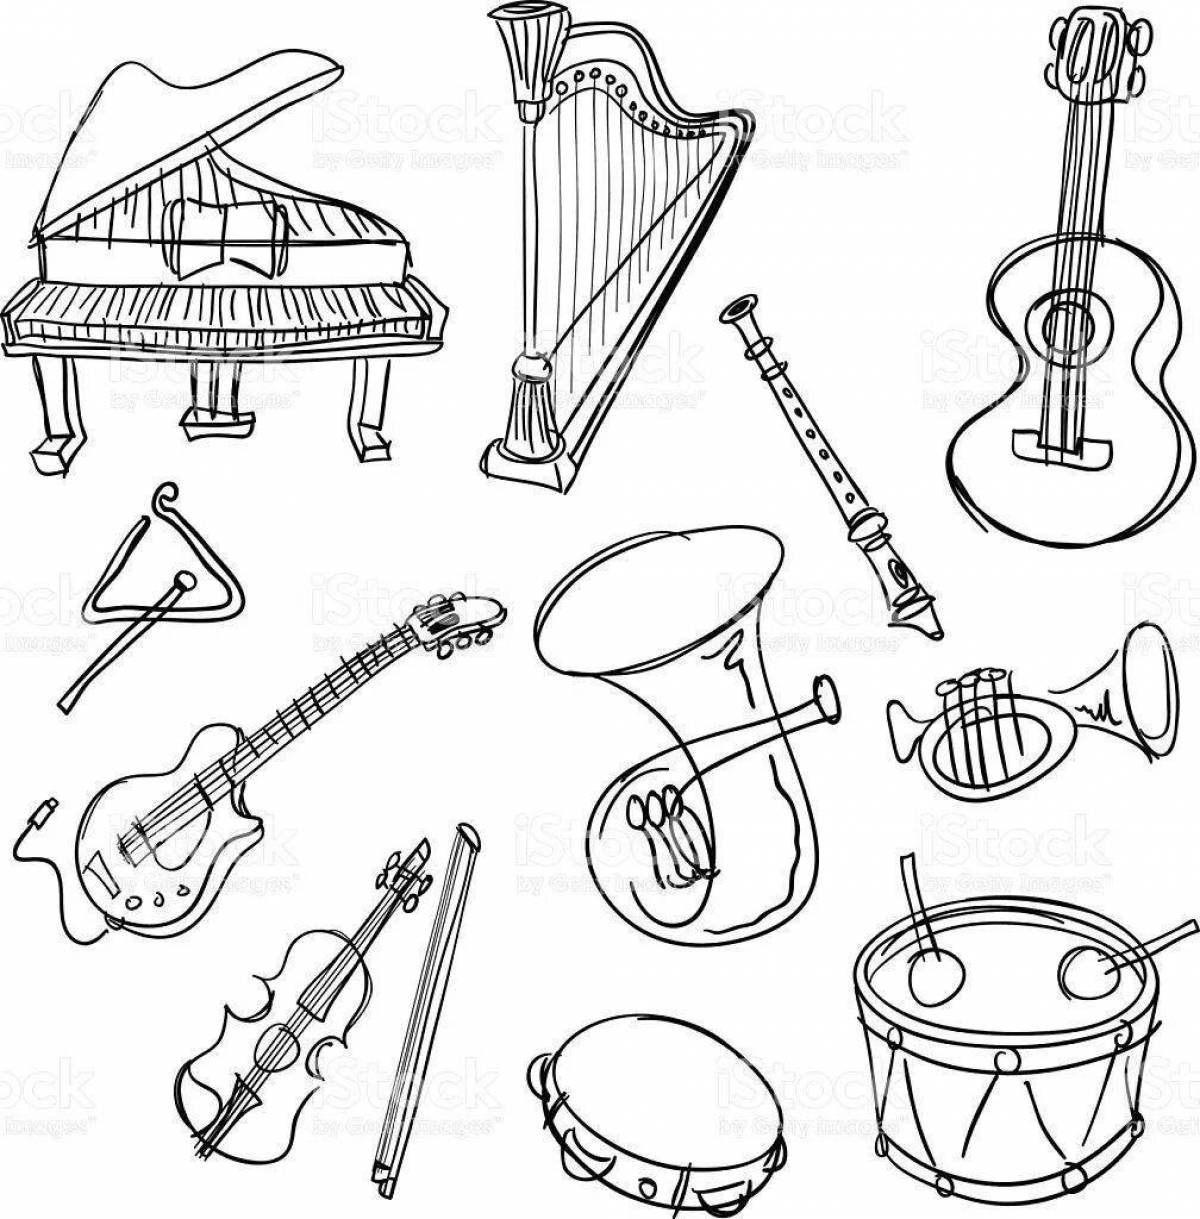 Charming musical instruments coloring 1st grade